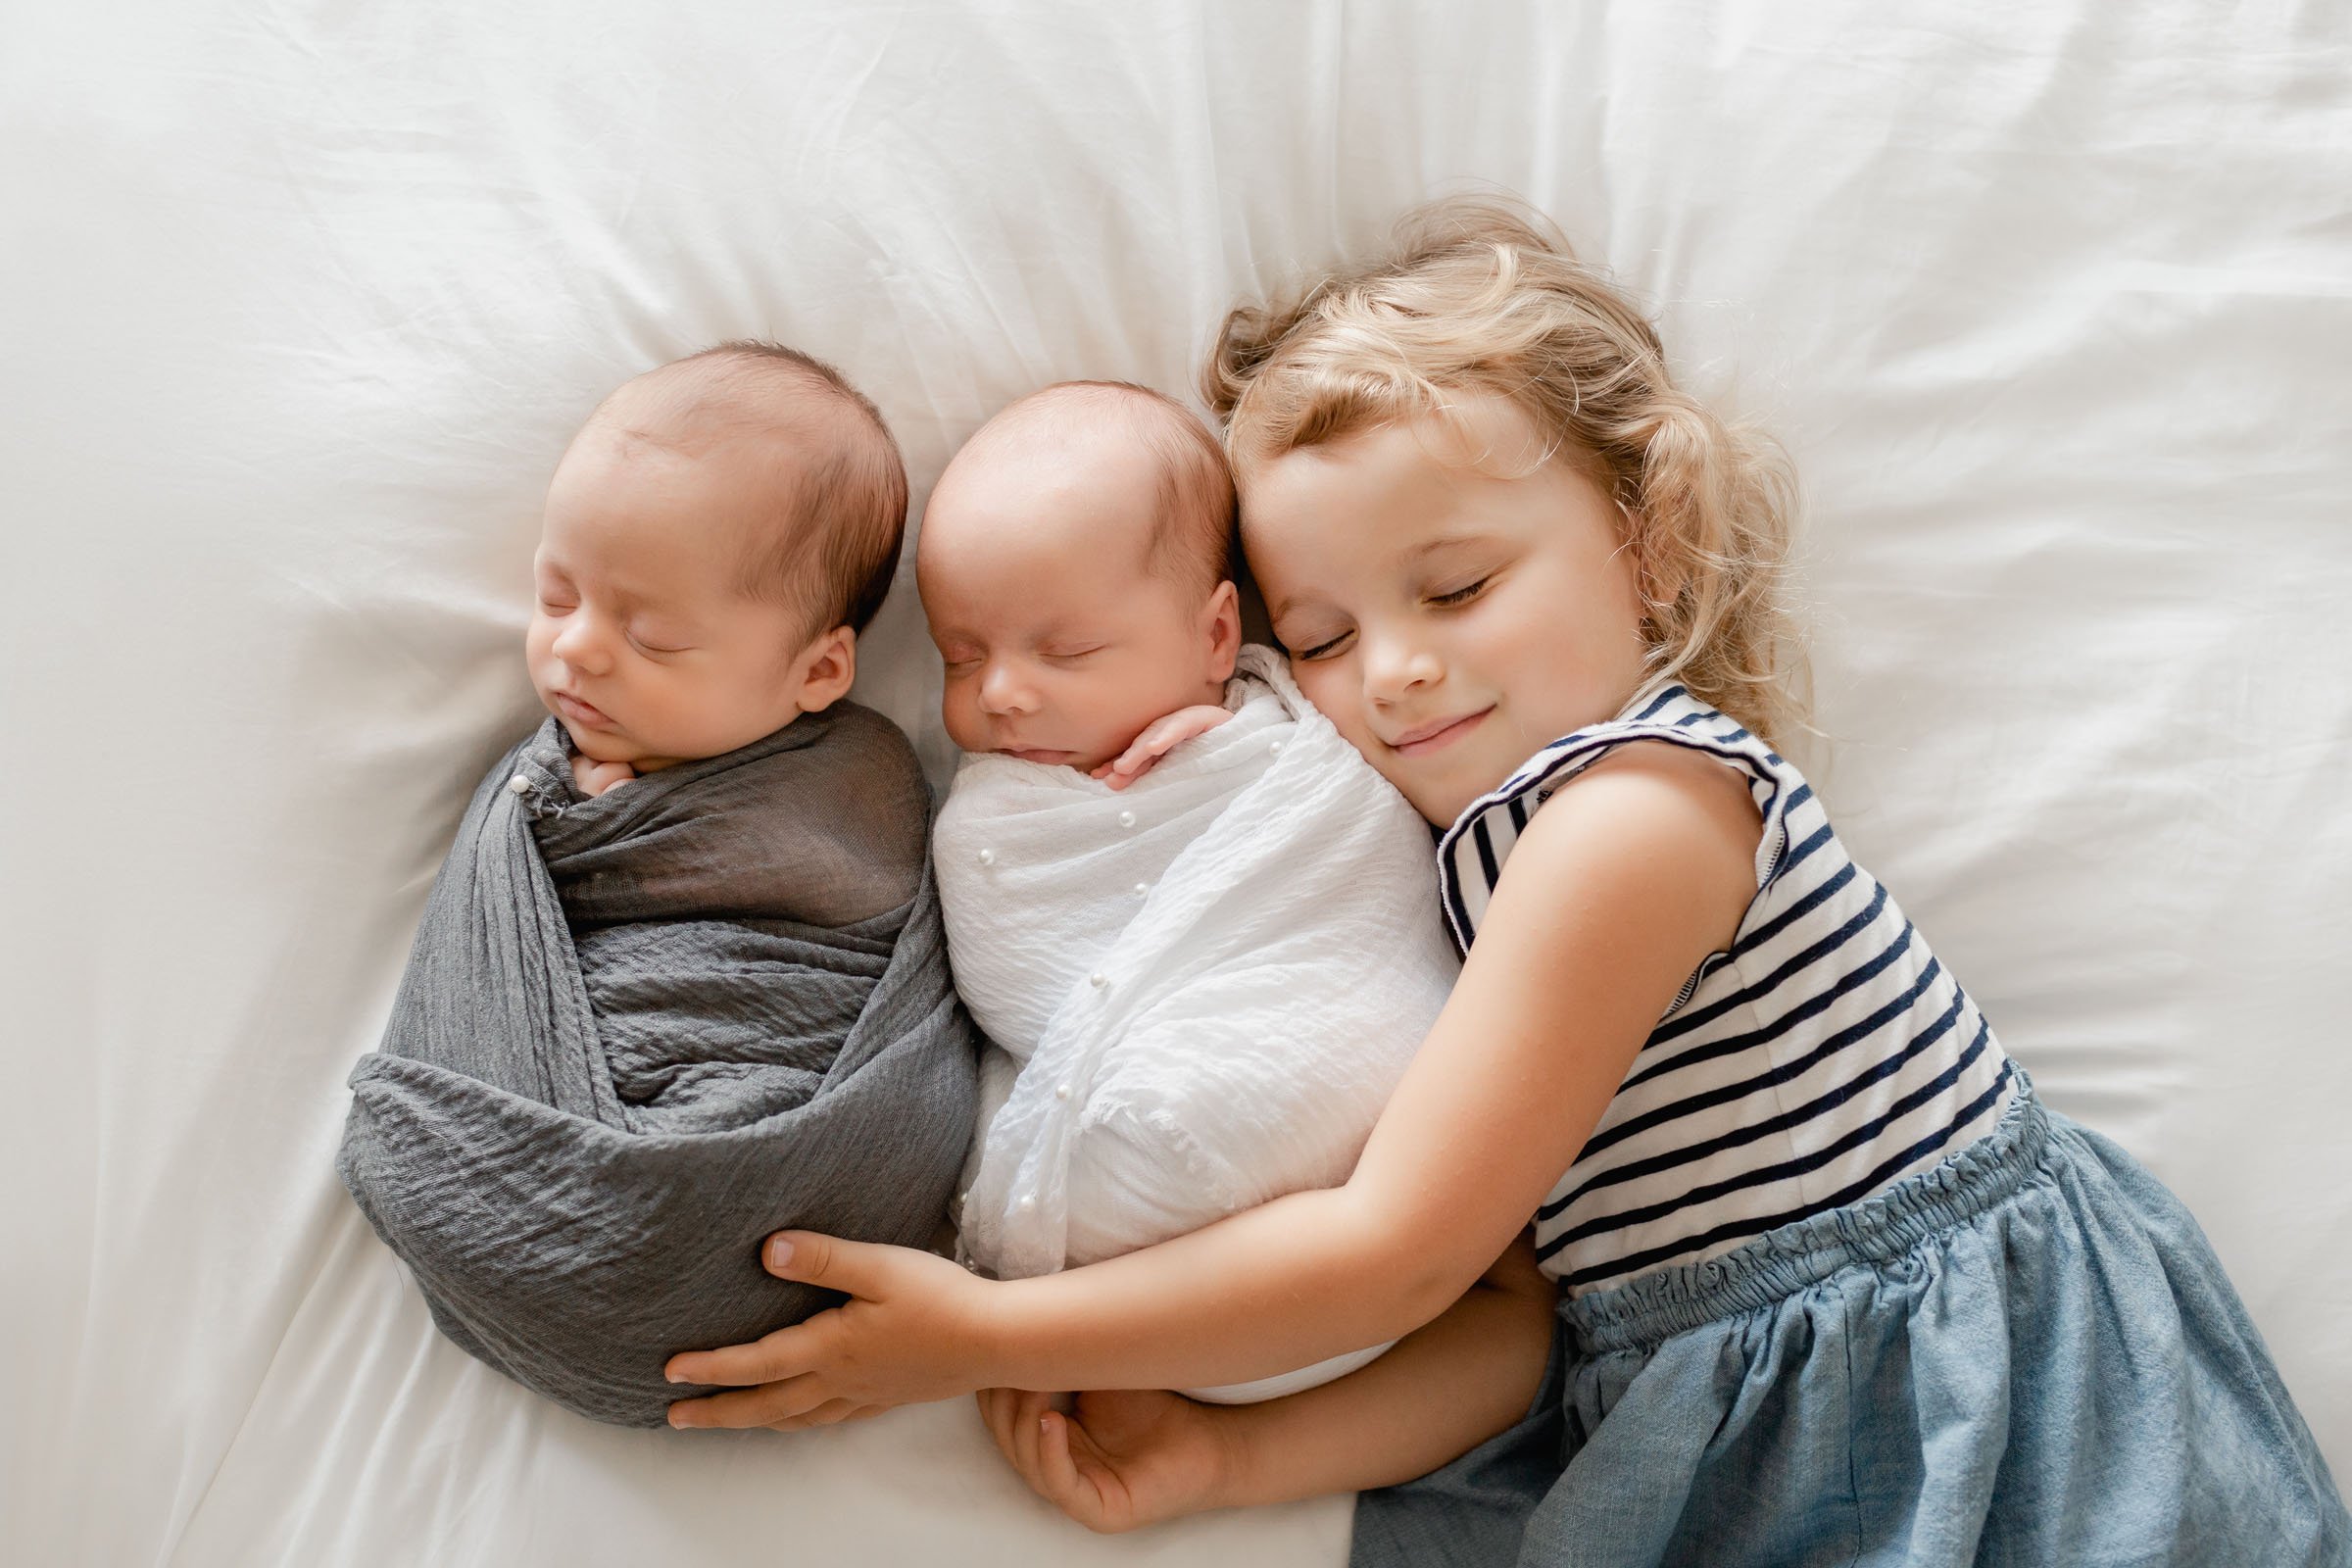 Older sister is posing with her twin newborn brothers during a newborn photoshoot in San Diego. They're all laying on a bed with older sibling hugging around the newborn twin brothers.